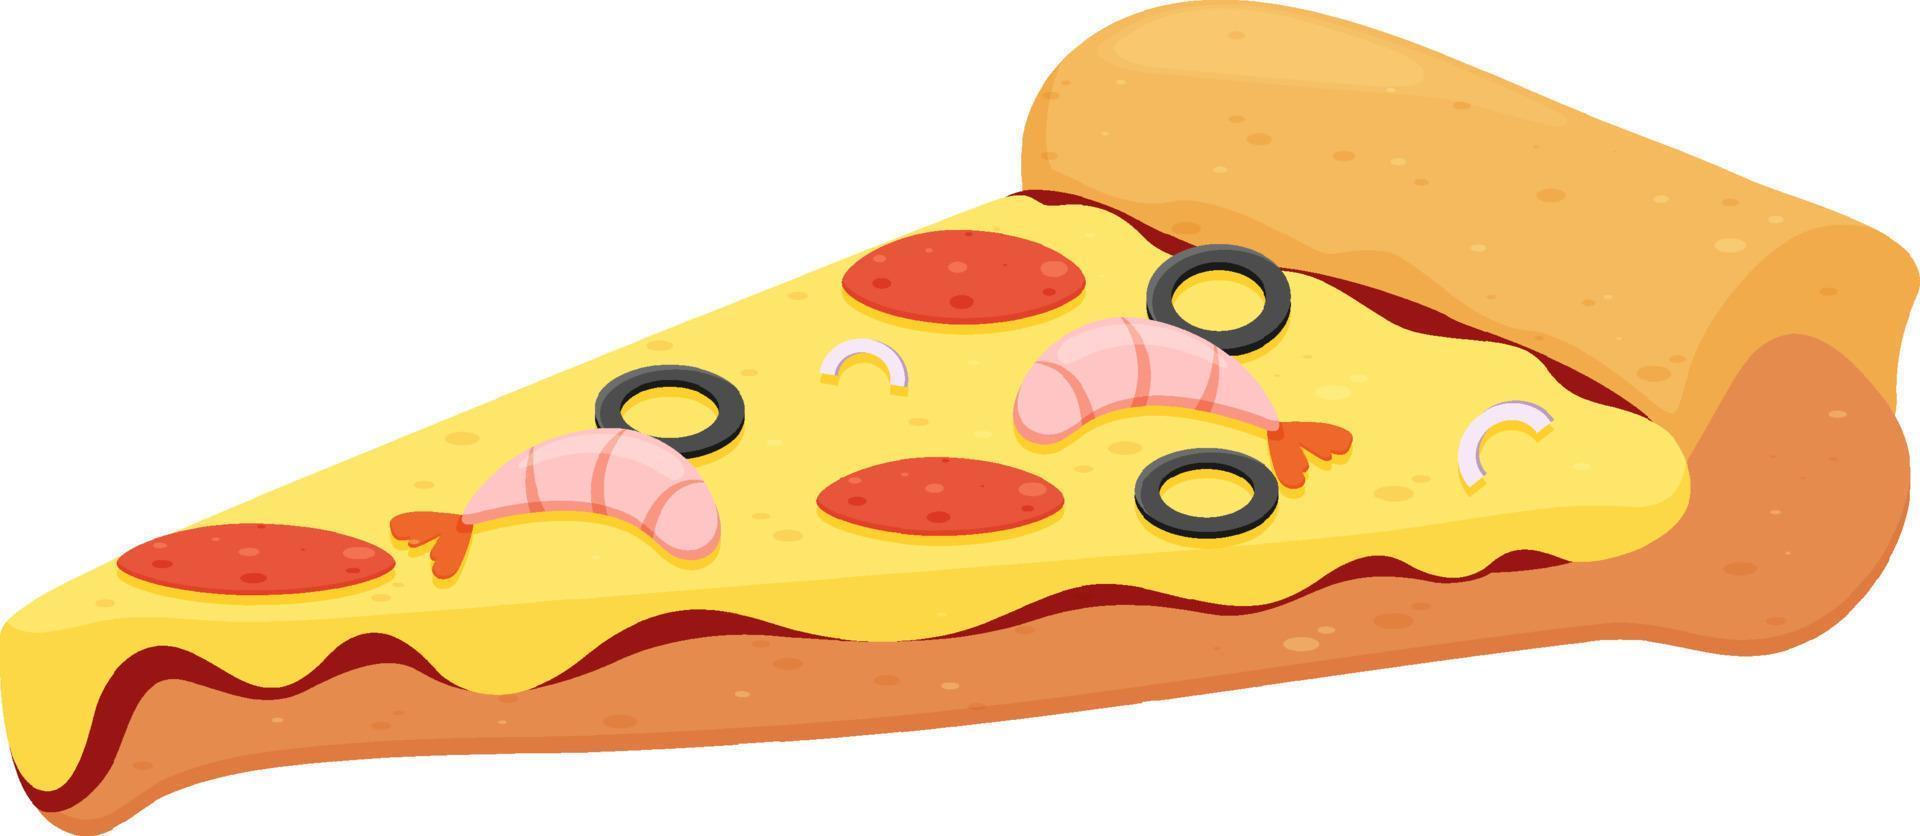 A piece of pizza isolated vector